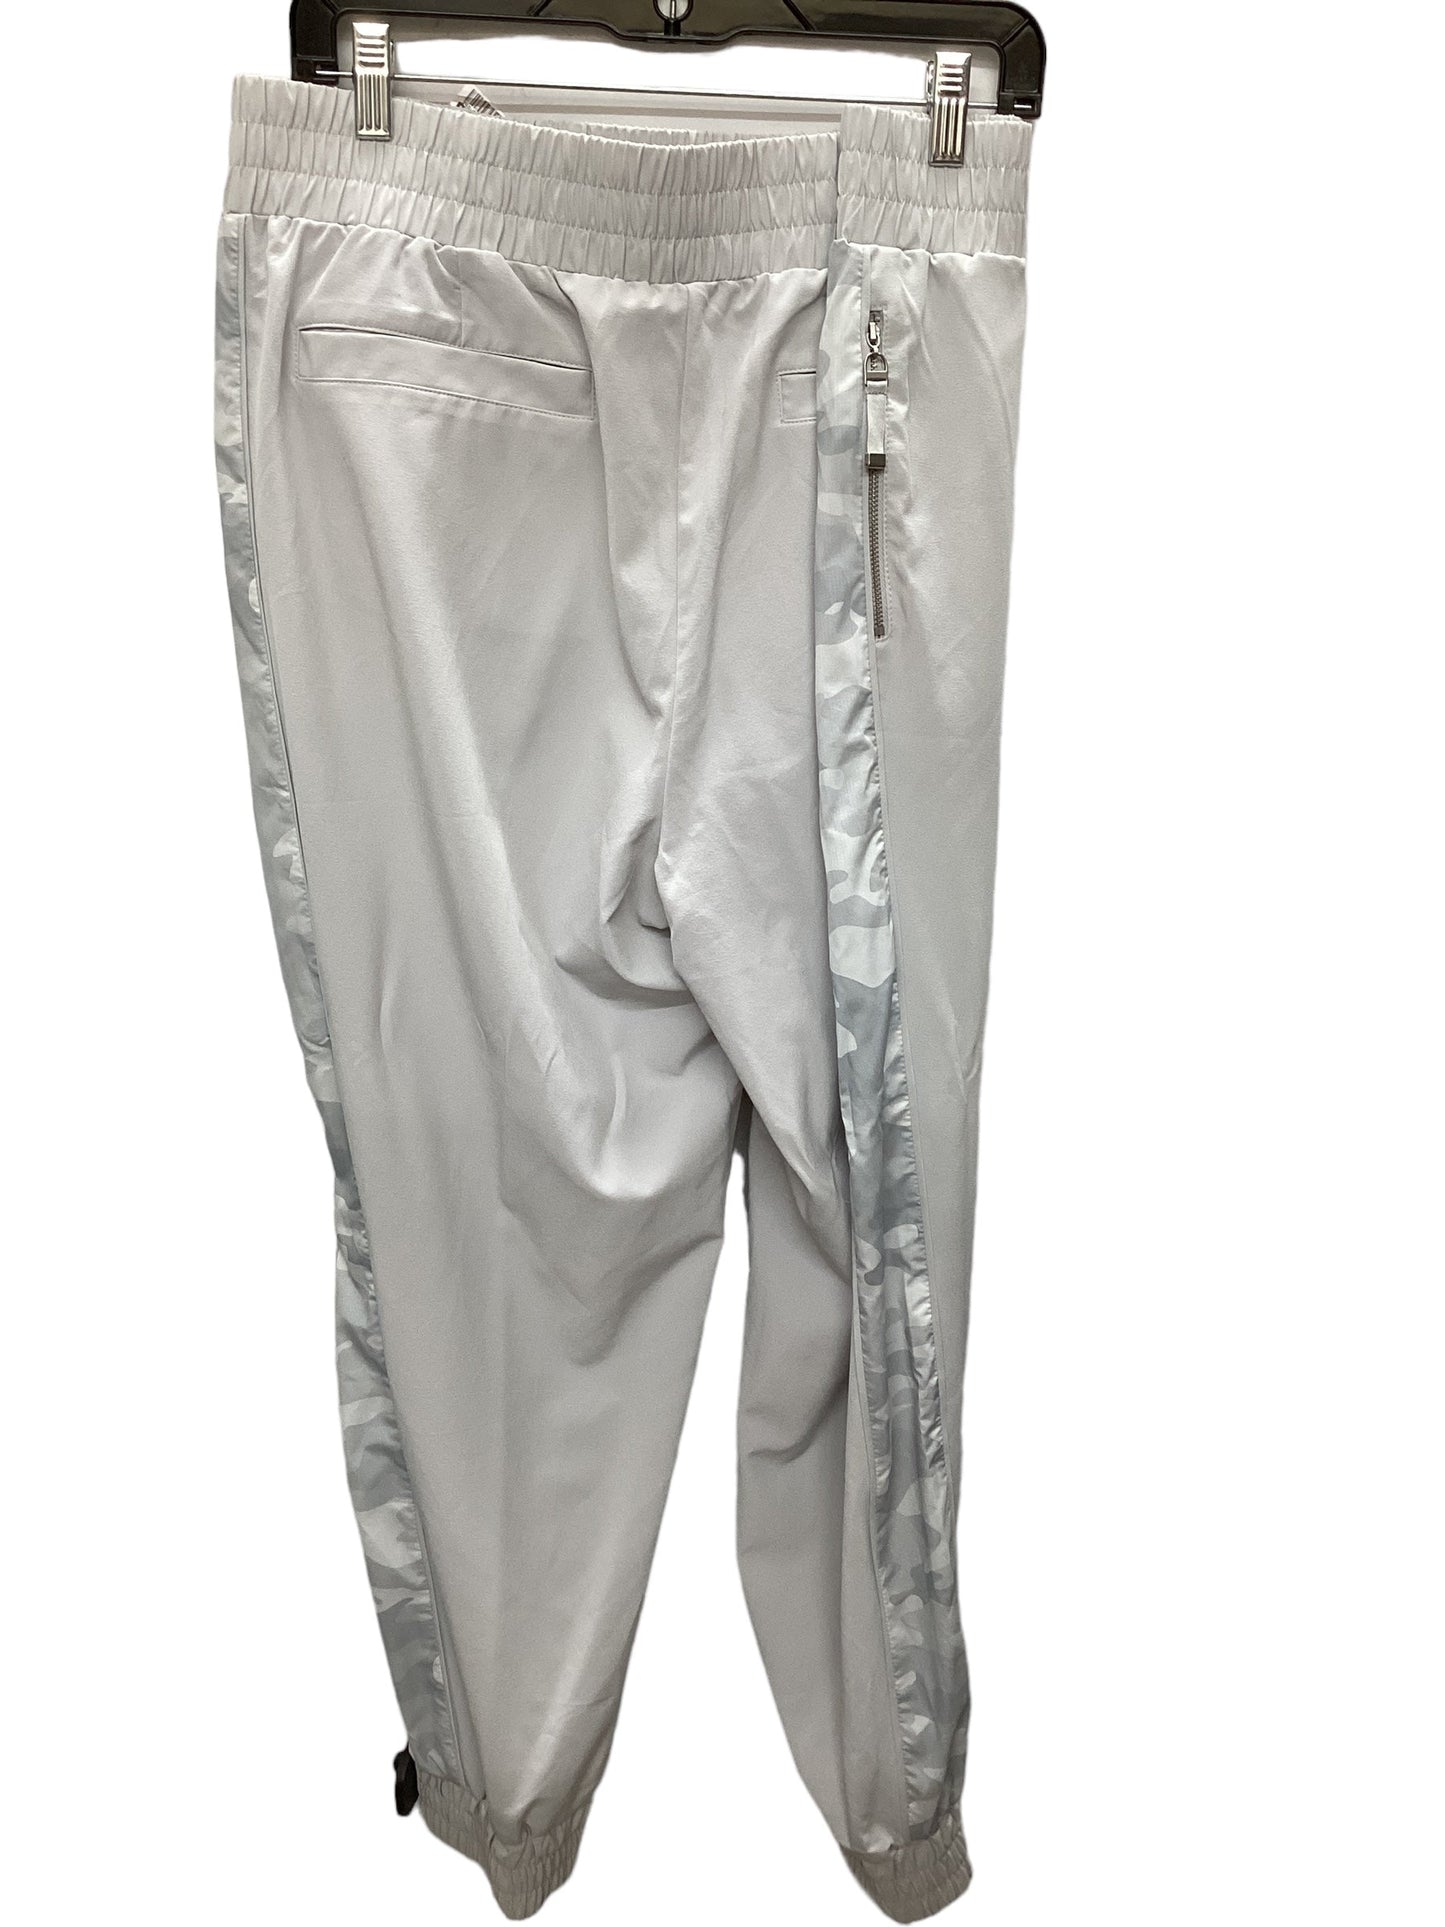 Pants Joggers By Zenergy By Chicos  Size: 3